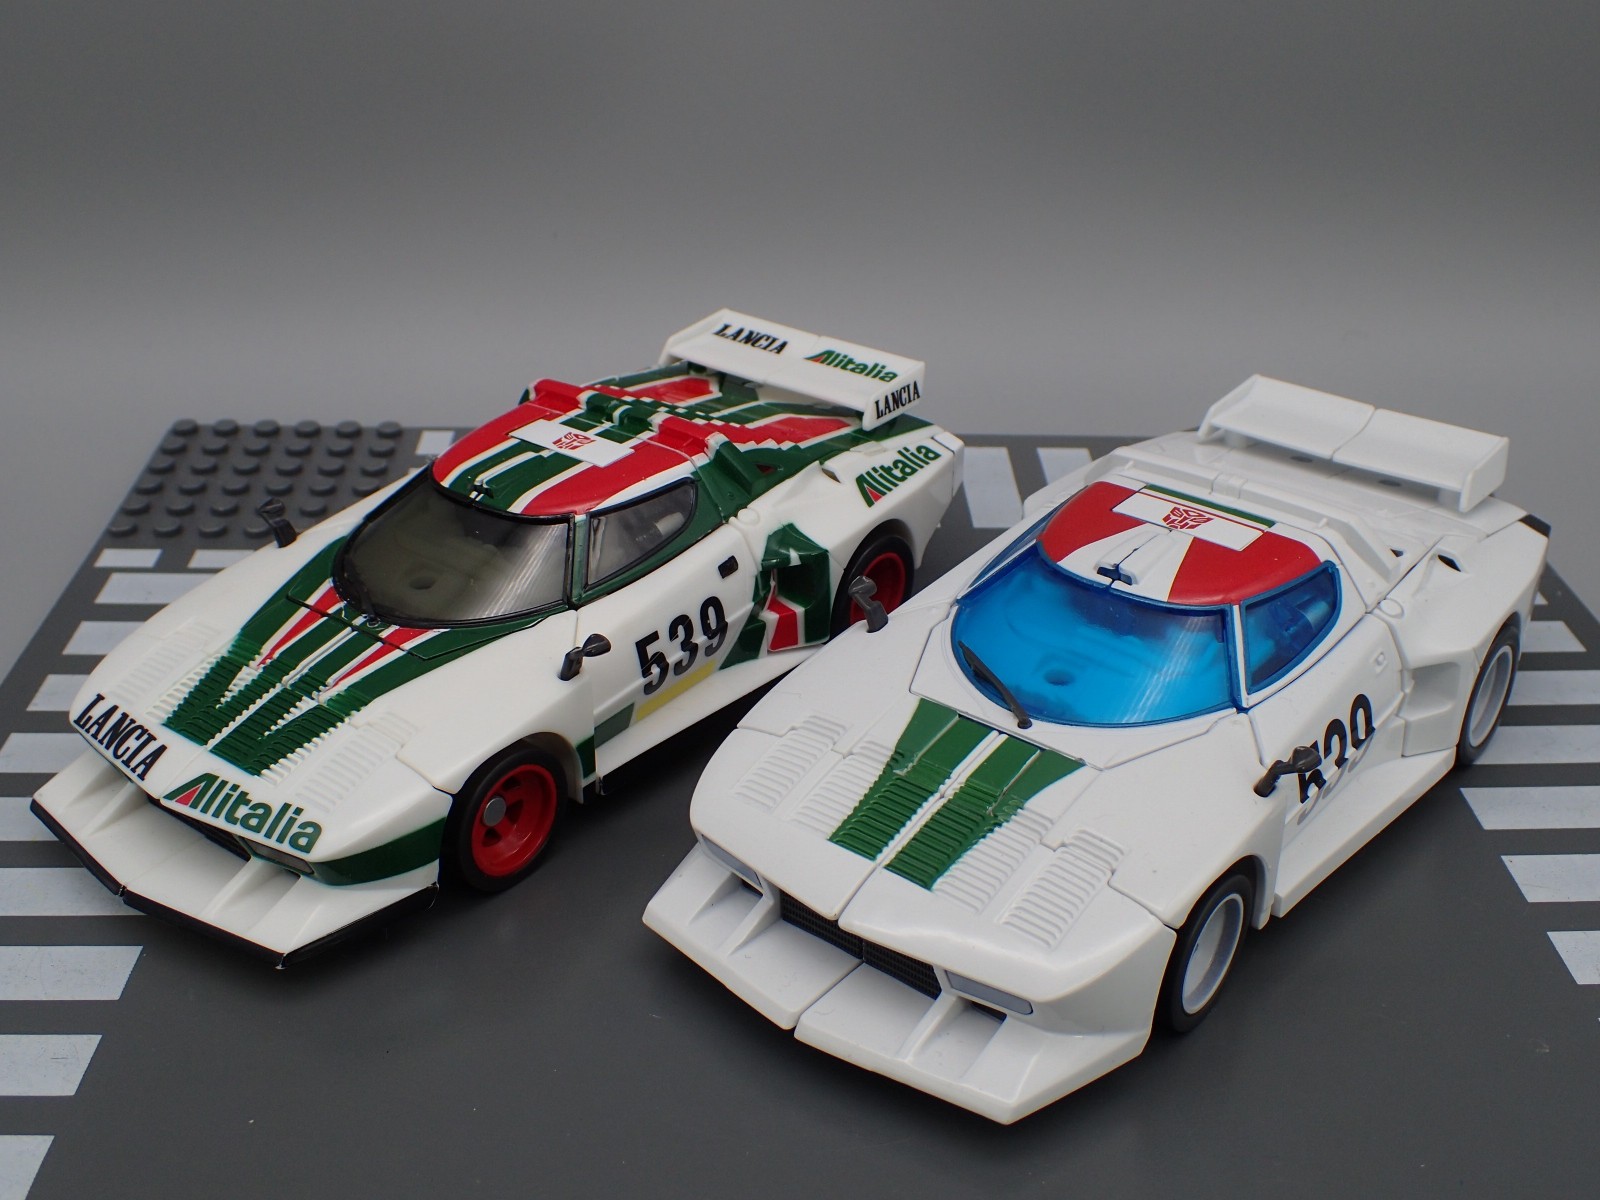 Transformers News: Masterpiece MP-20+ Wheeljack Comparison Gallery with MP-20